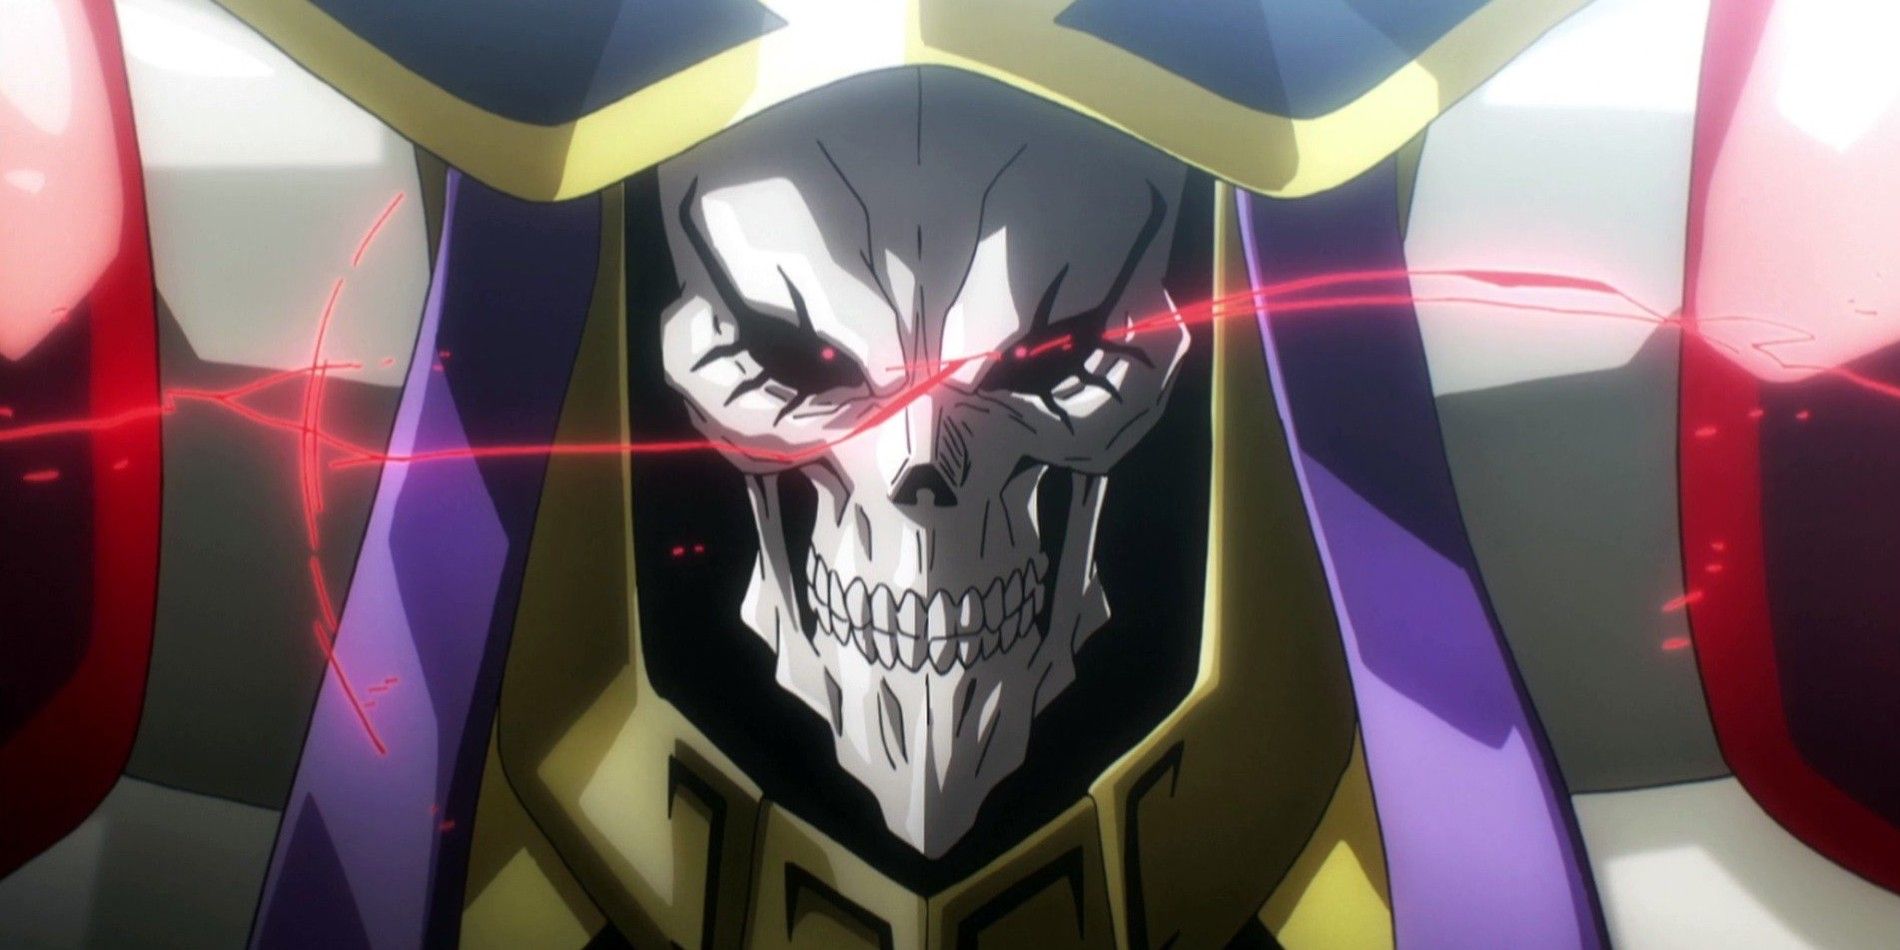 Overlord Season 4 & Movie Updates & News: What We Know So Far